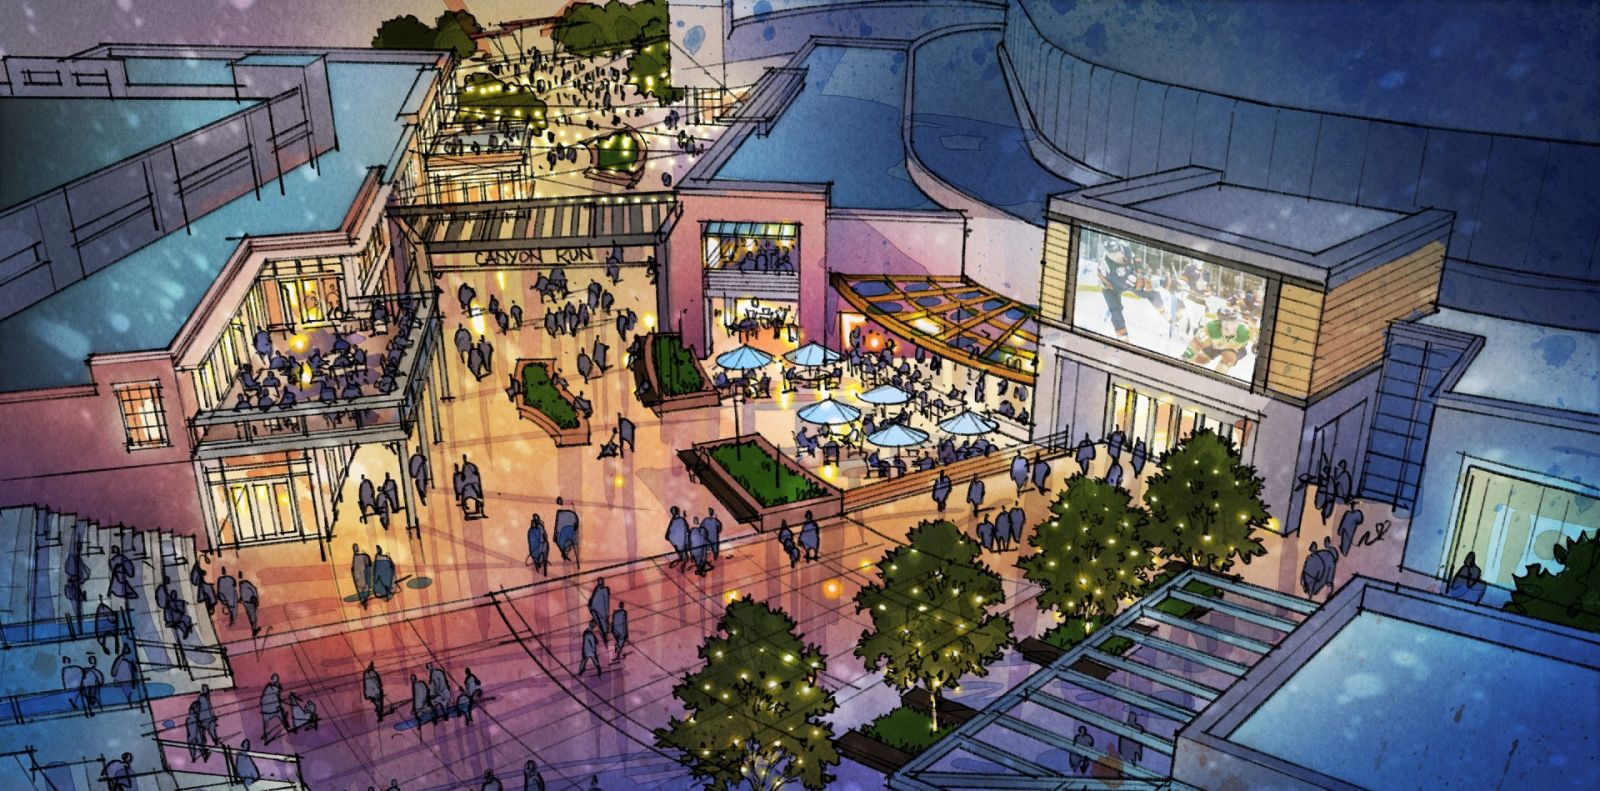 An early rendering from February shows pedestrian-friendly areas, retail and entertainment opportunities surrounding the Bon Secours Wellness Arena and the proposed site. (Photo/Provided)